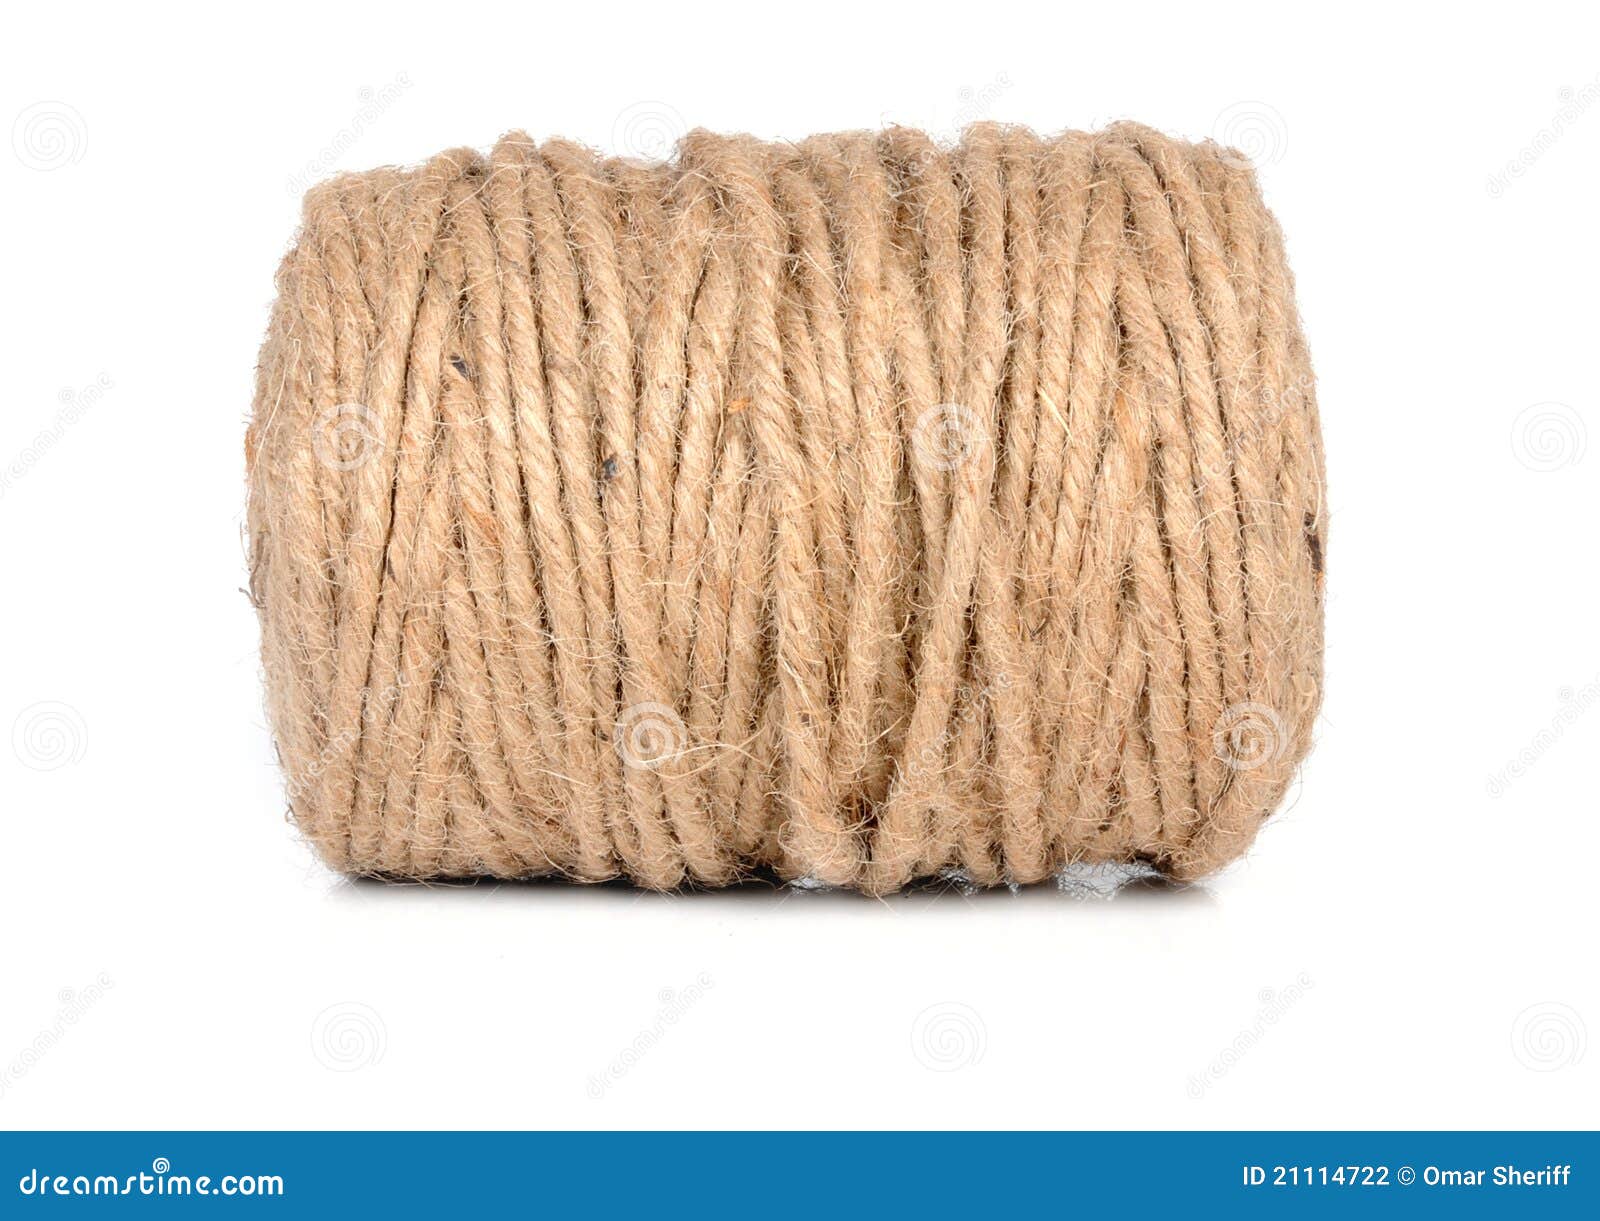 Thick string roll stock photo. Image of accessory, cotton - 21114722